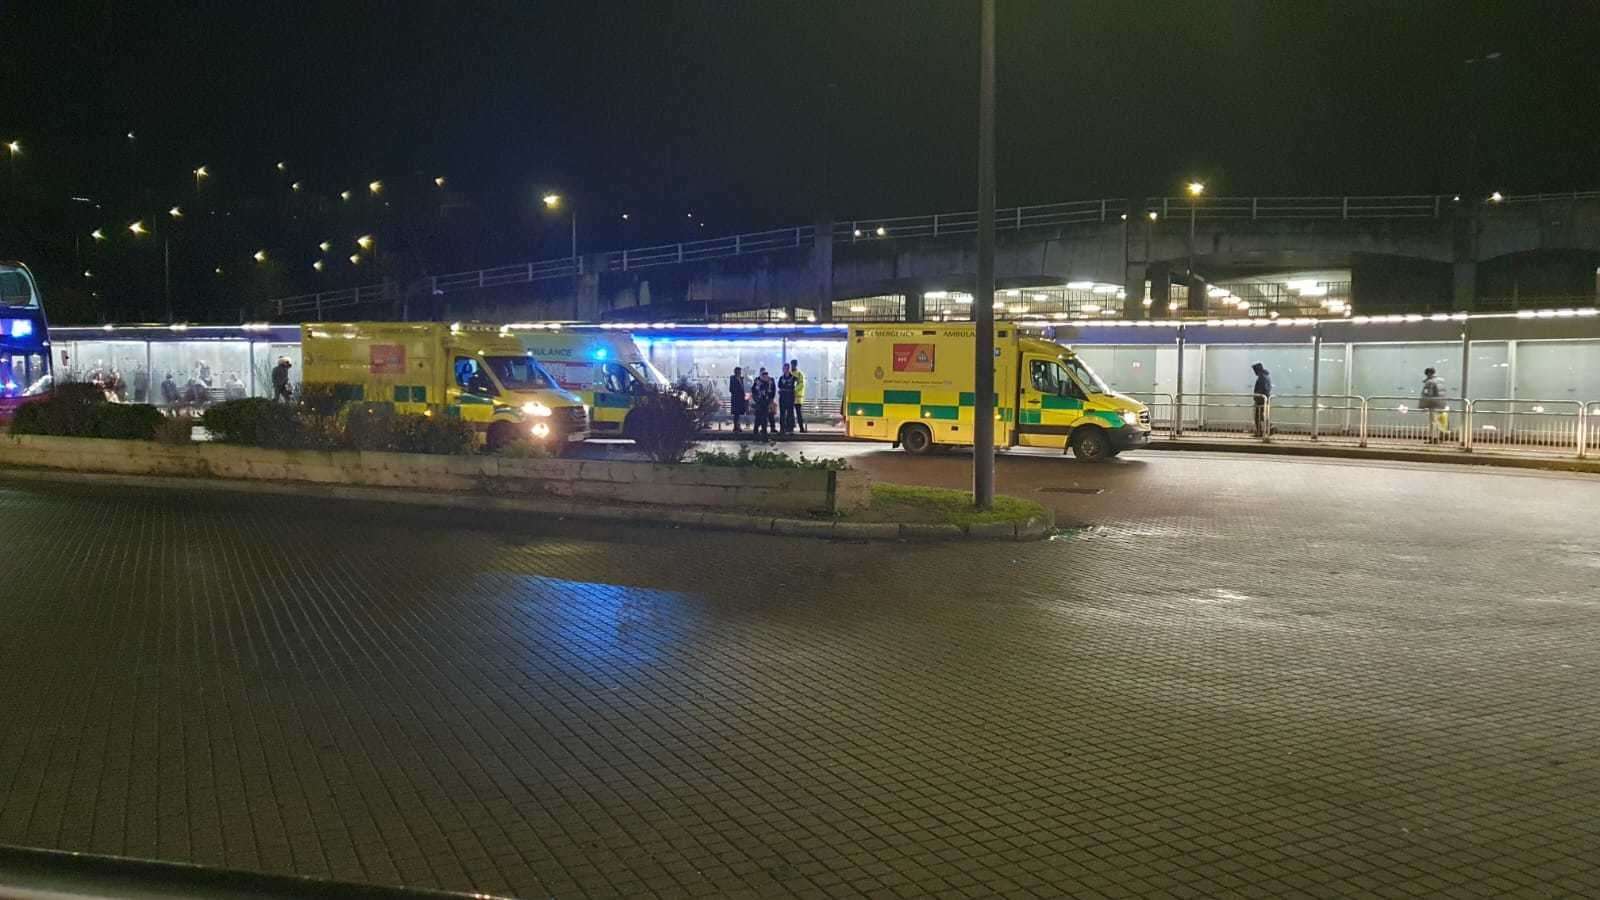 Ambulance vehicles have been spotted at Bluewater in Greenhithe